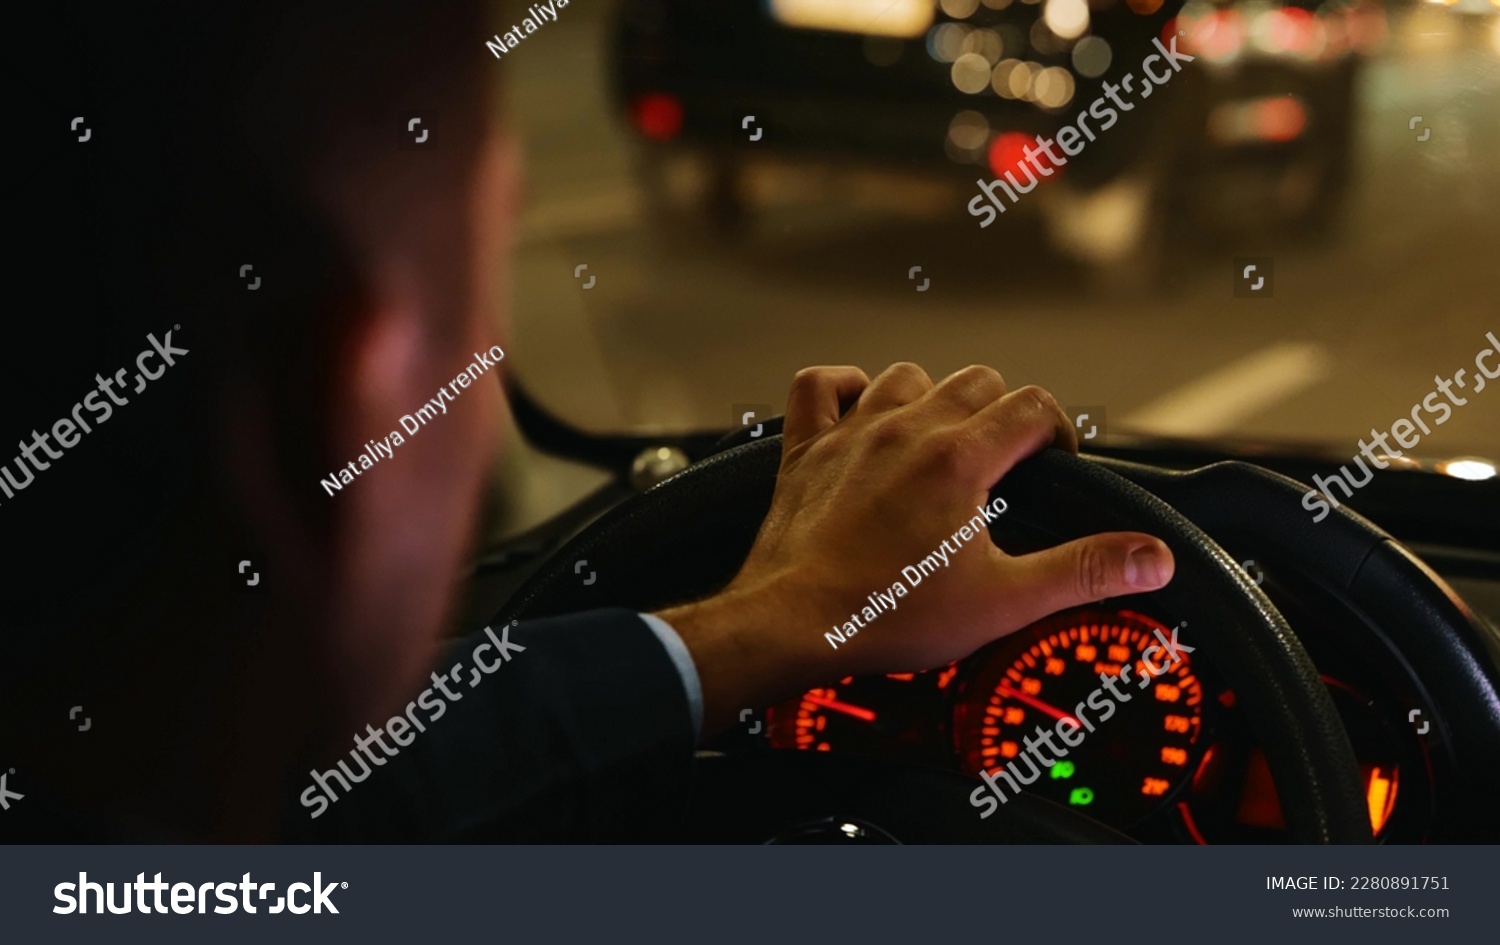 Man driving car fast in night city street with traffic. Road trip, speeding, driver concept. Commuter, male taxi cab driver. Interior back view of male hand on steering wheel in car. Close up #2280891751